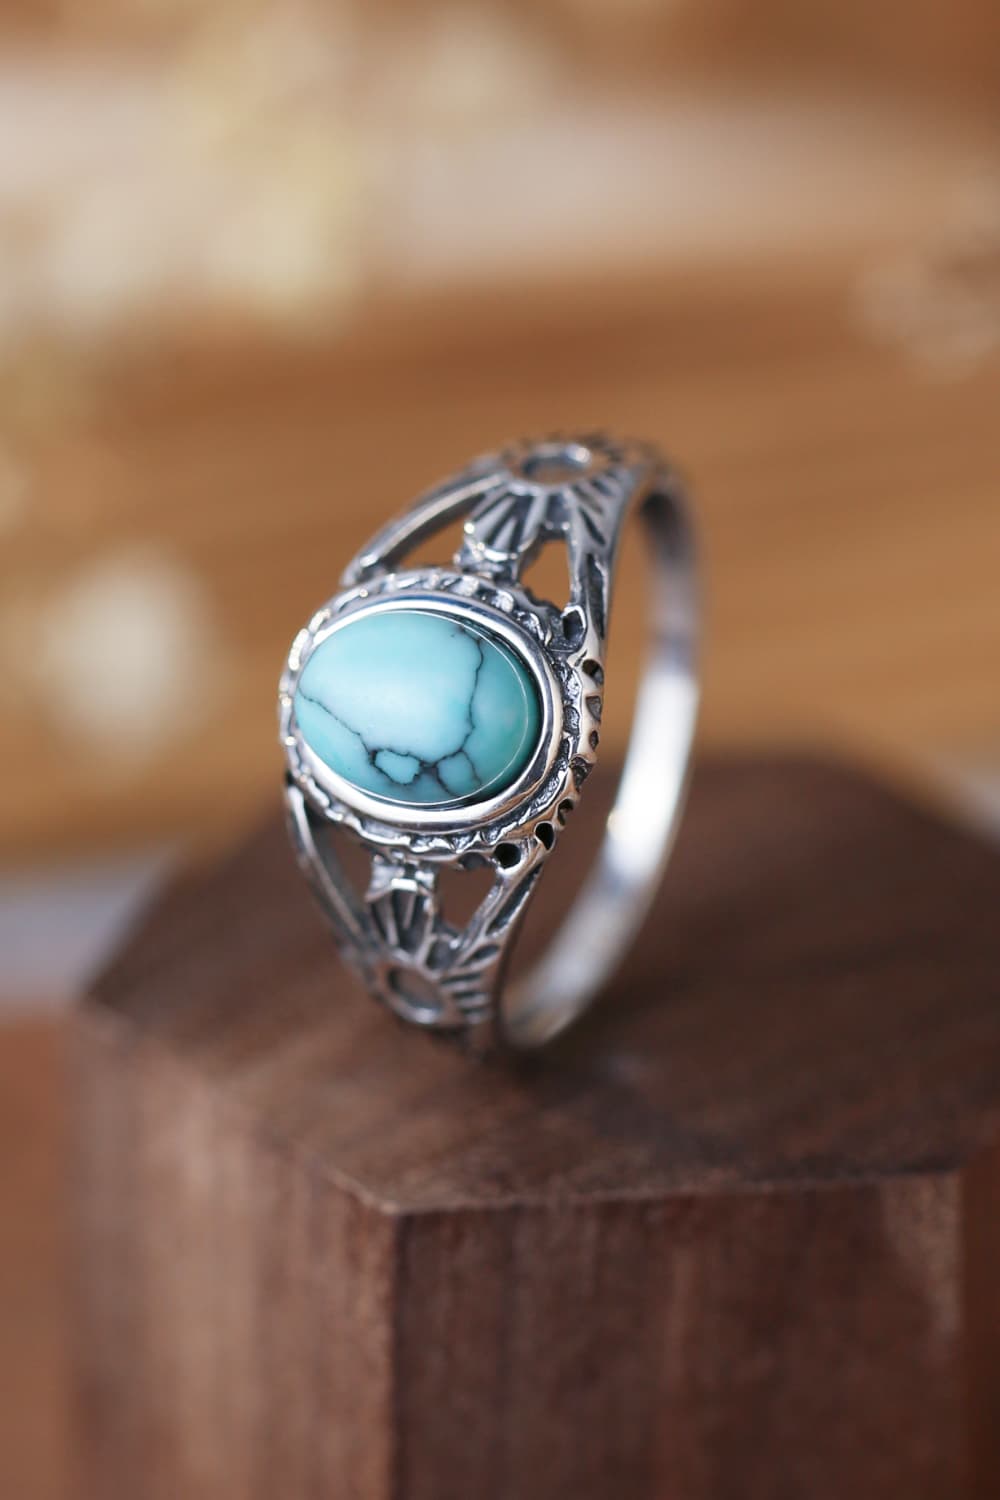 Women’s Turquoise 925 Sterling Silver Ring